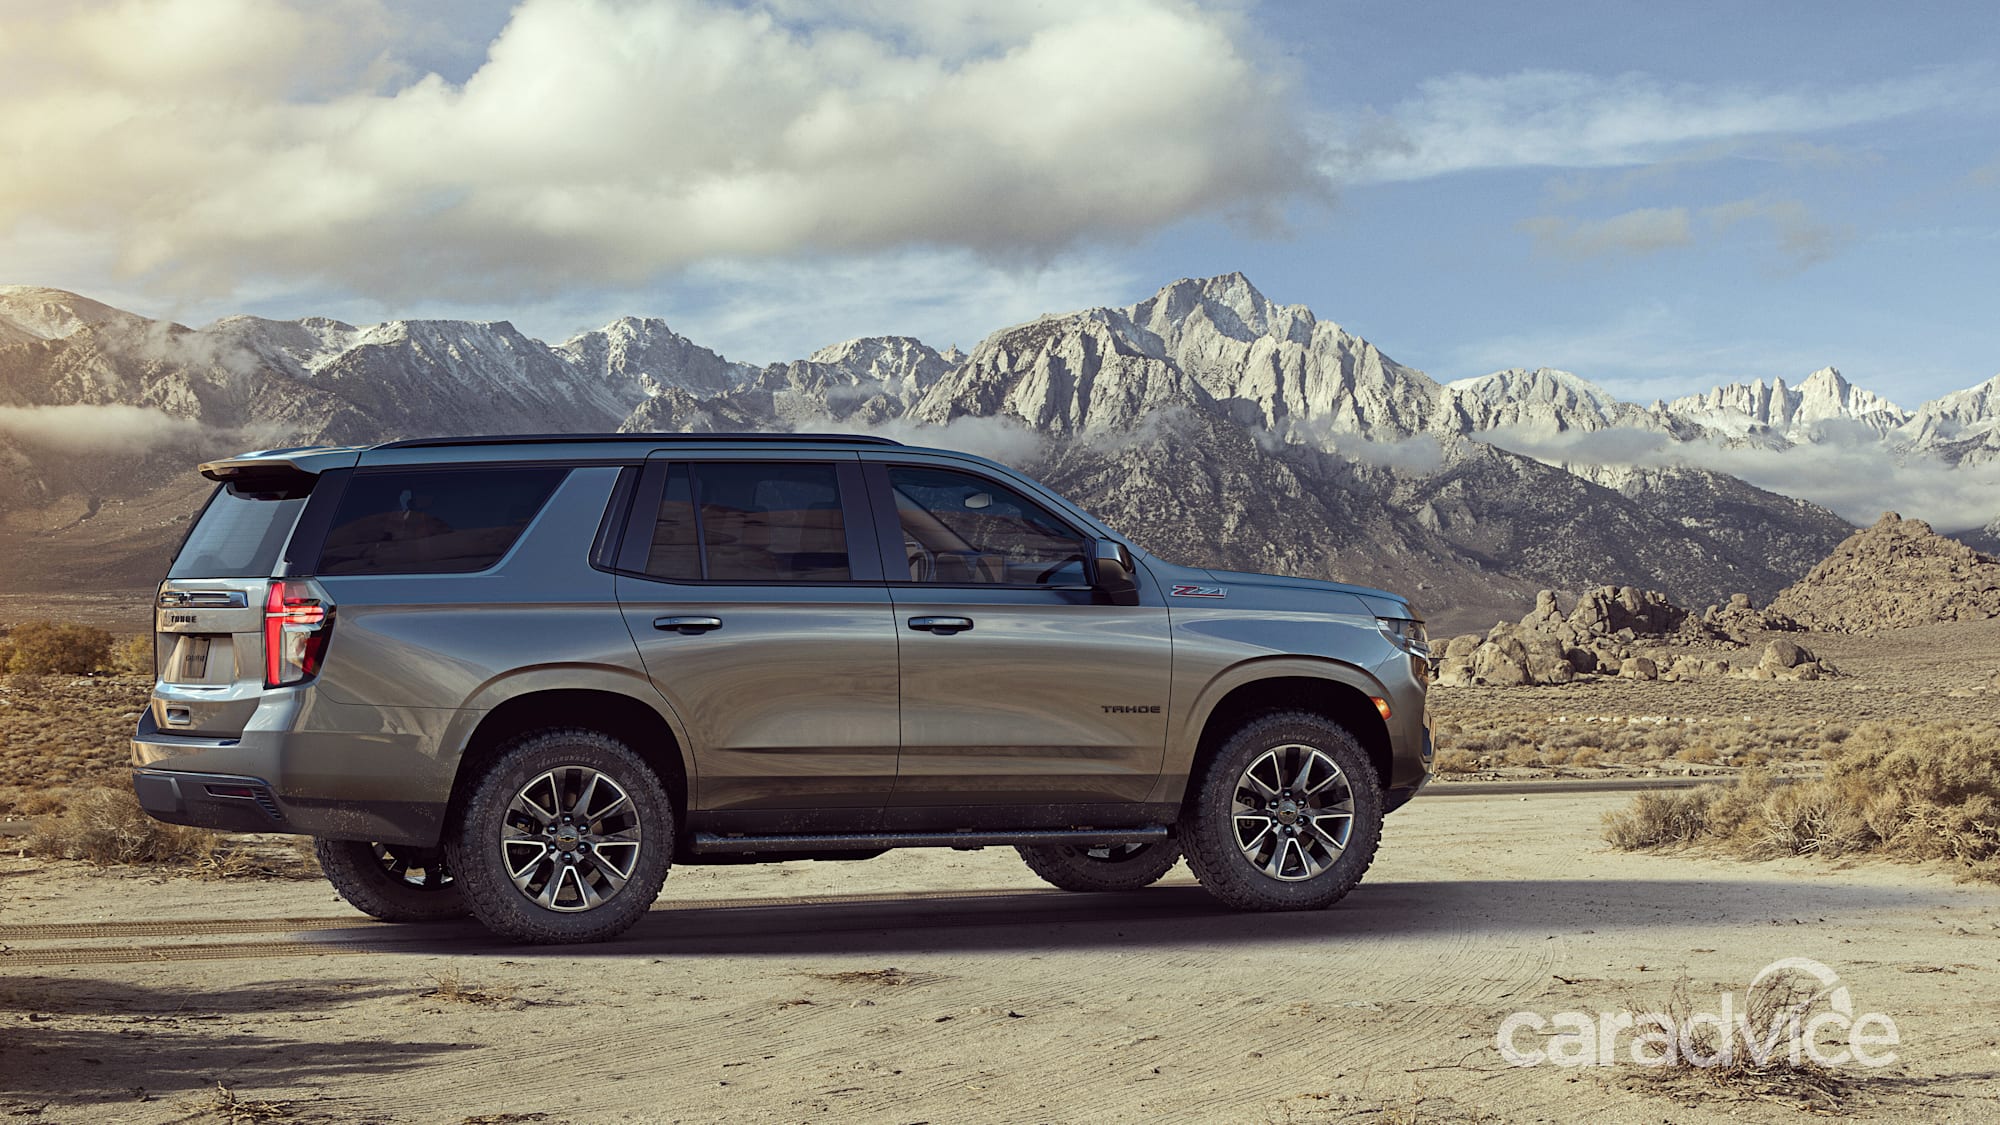 2021 Chevy Tahoe Revealed | Whats new, independent 